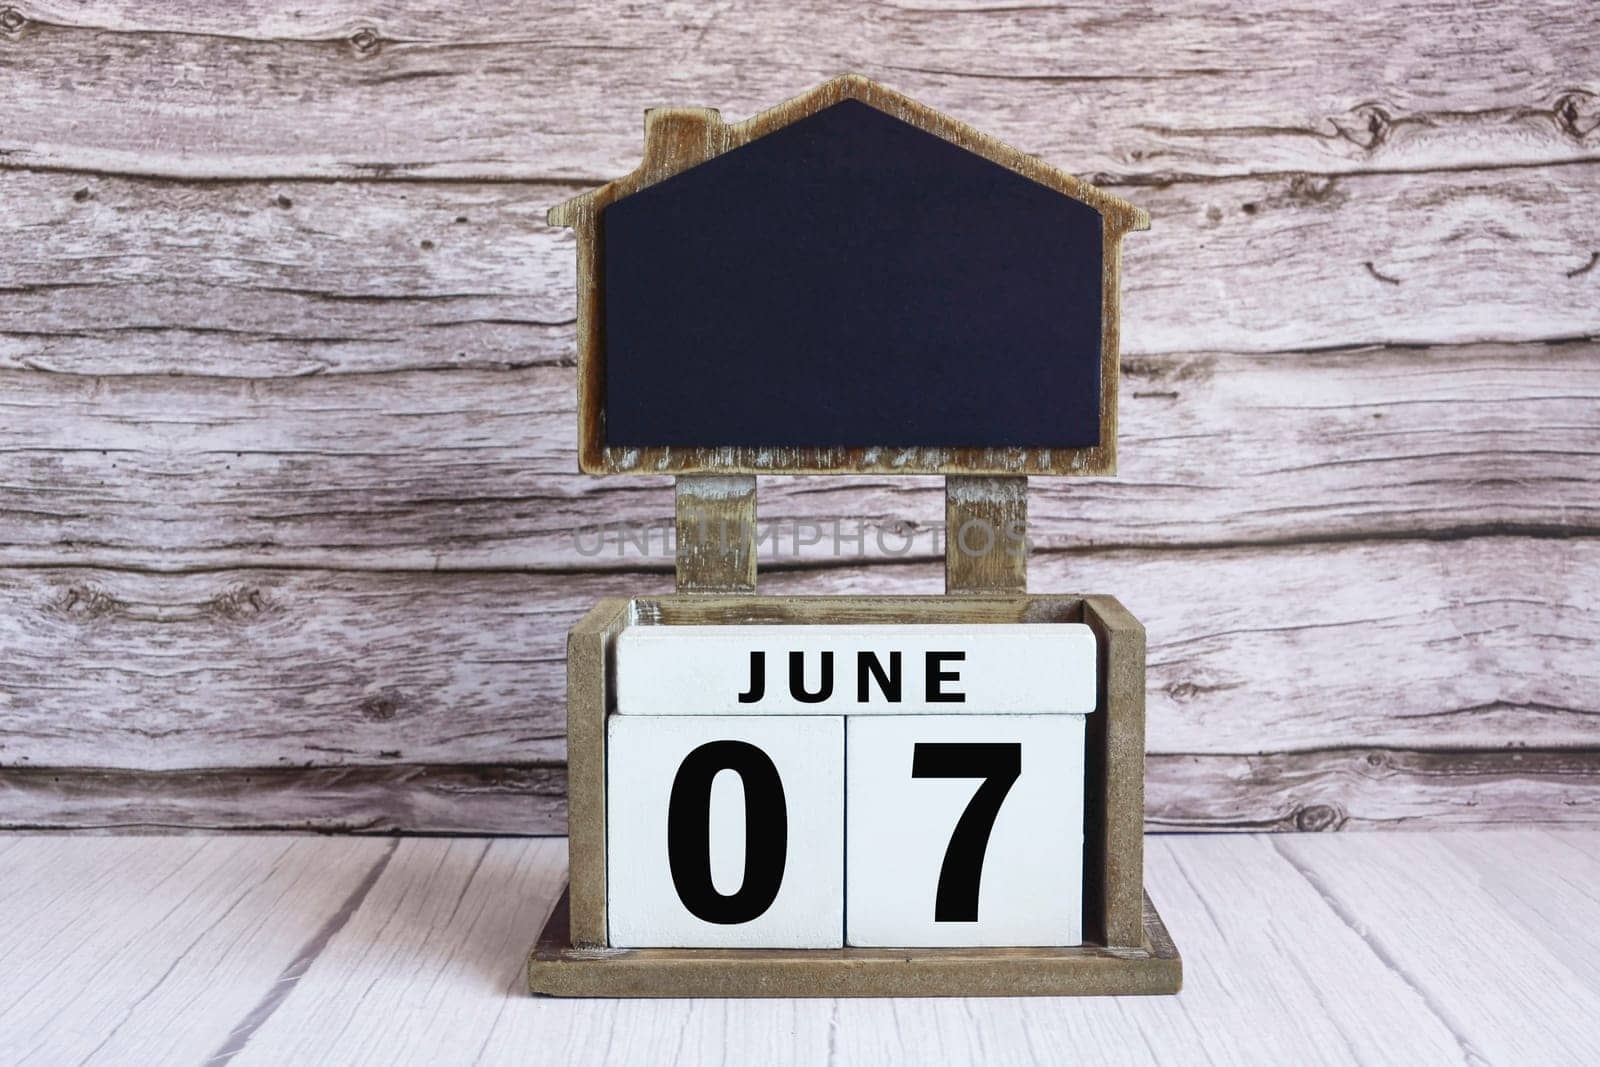 Chalkboard with June 07 calendar date on white cube block on wooden table.